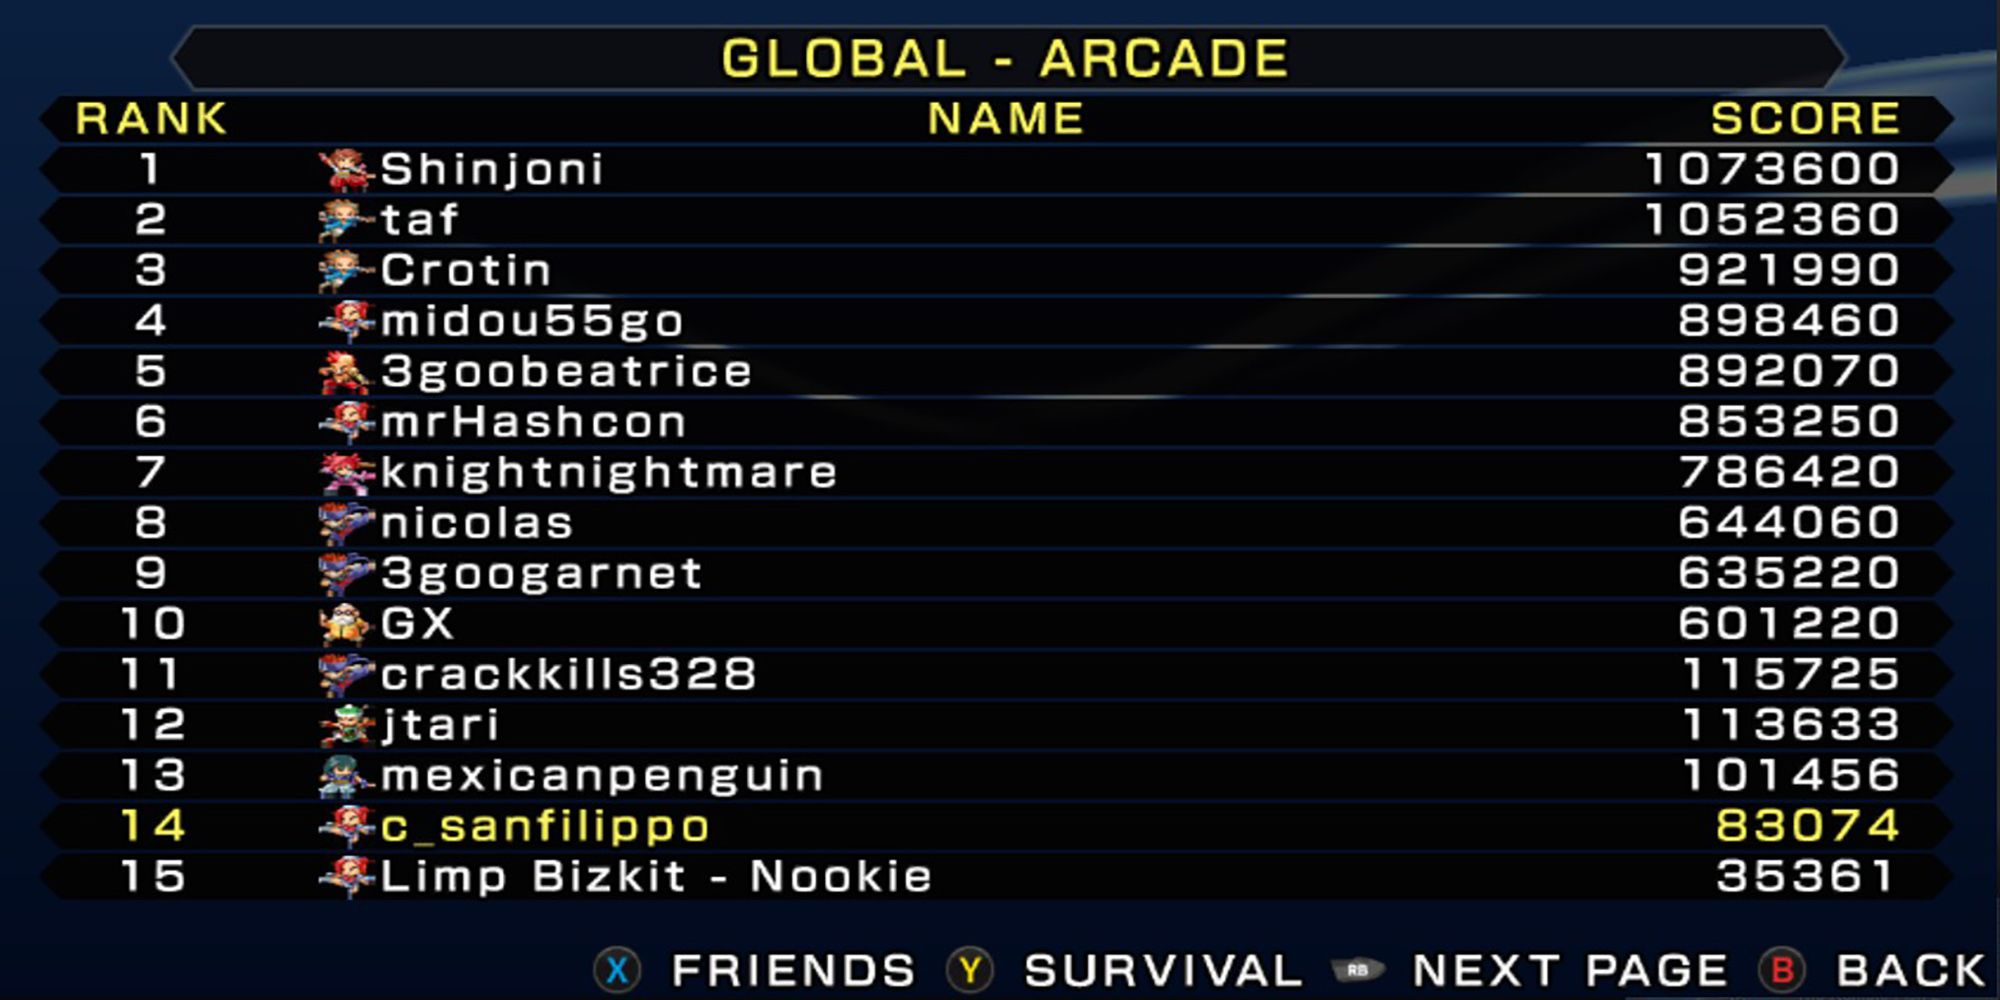 The Global Arcade Mode Rankings of The Rumble Fish 2.